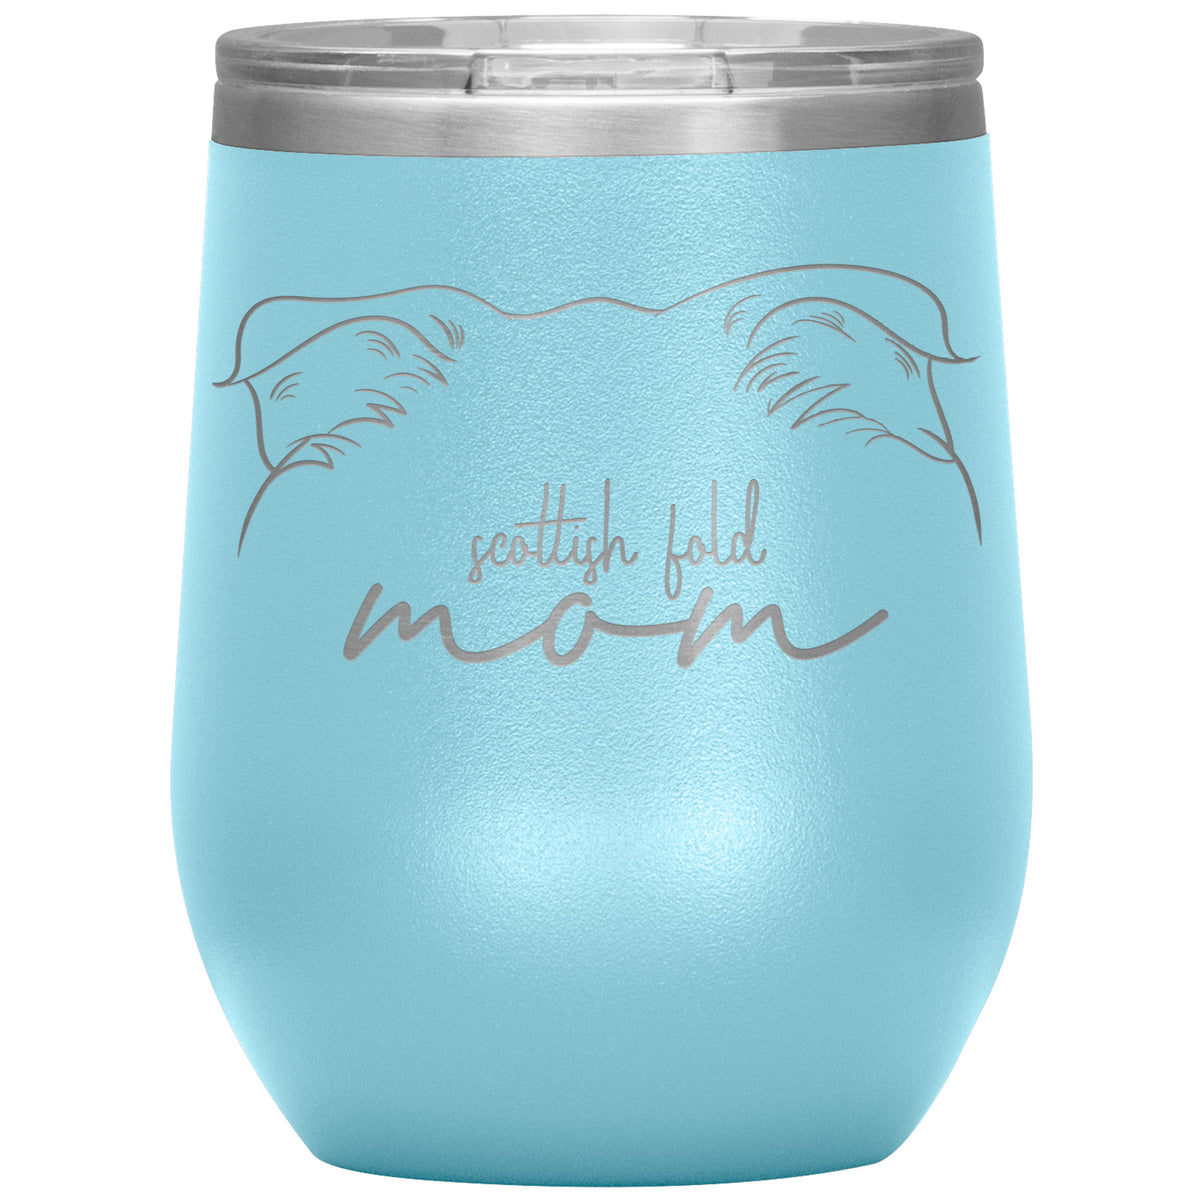 Scottish Fold Cat Mom 12oz Wine Insulated Tumbler - 3 Red Rovers